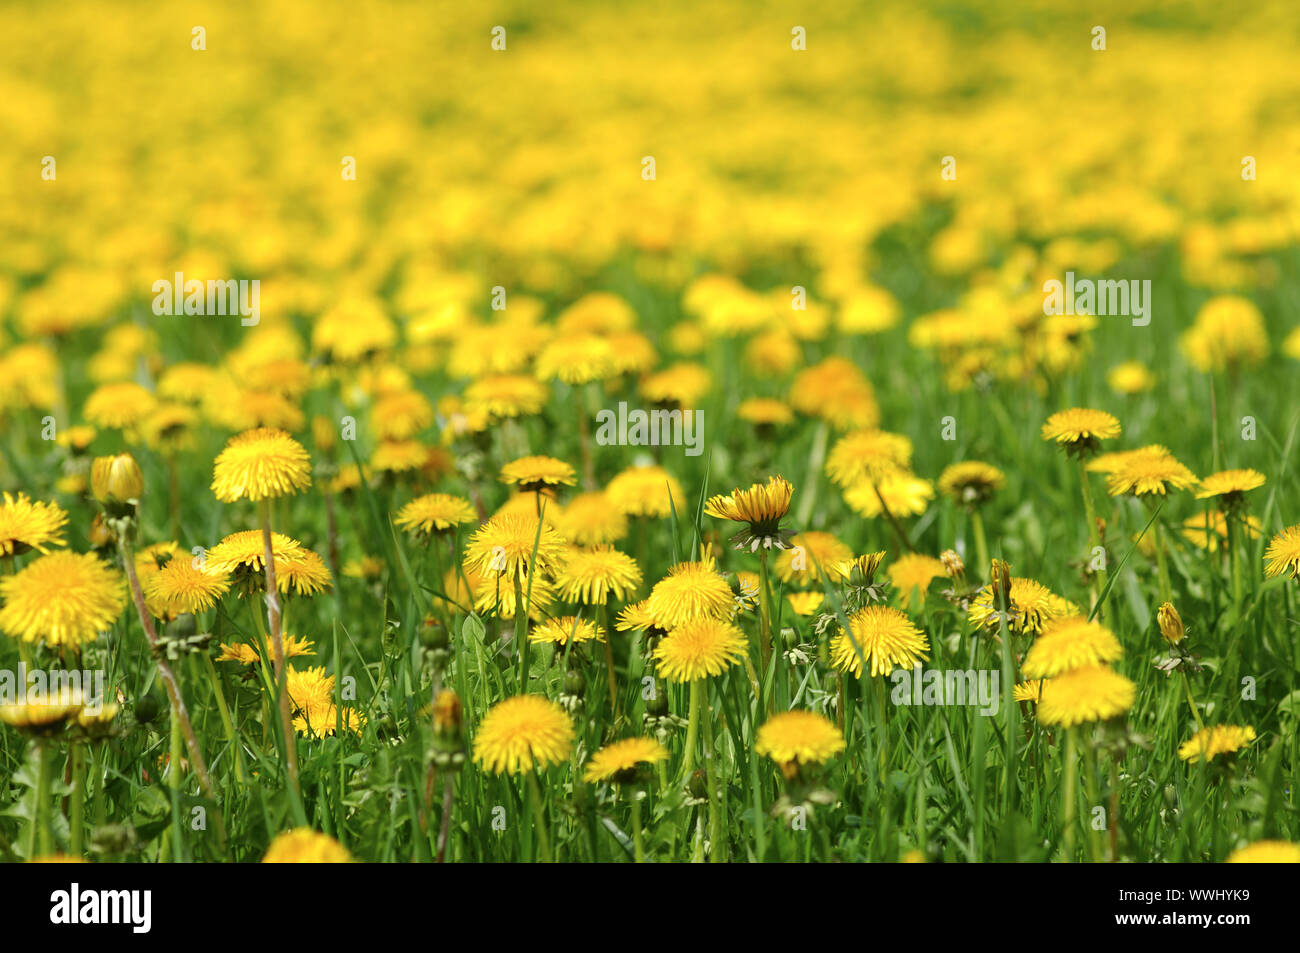 Green meadow with flowering dandelion Stock Photo